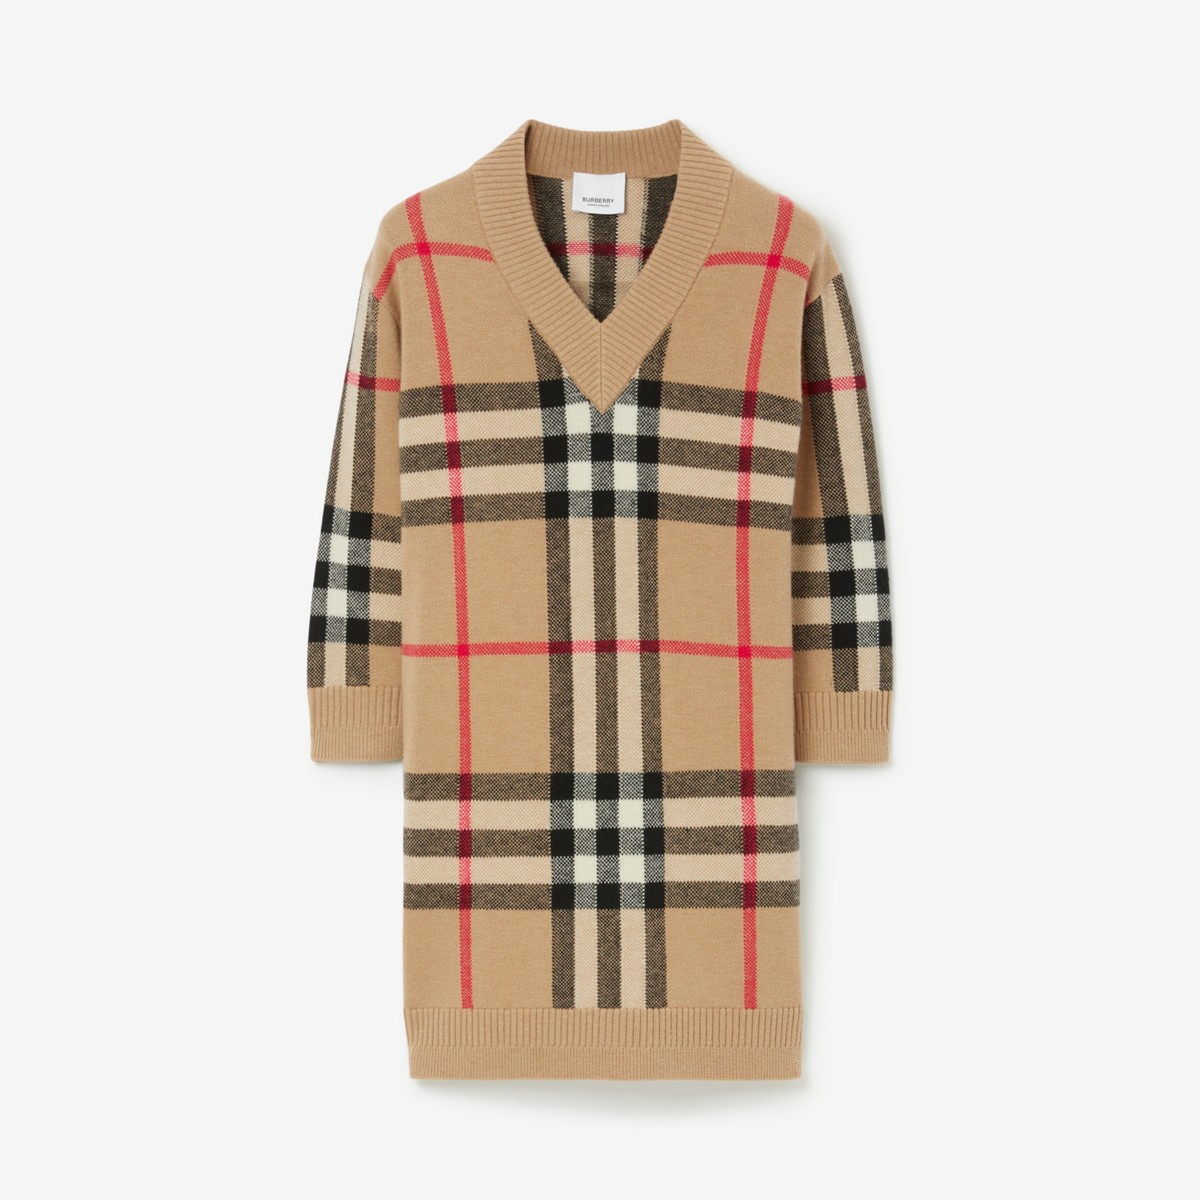 BURBERRY BURBERRY CHILDRENS CHECK WOOL CASHMERE SWEATER DRESS